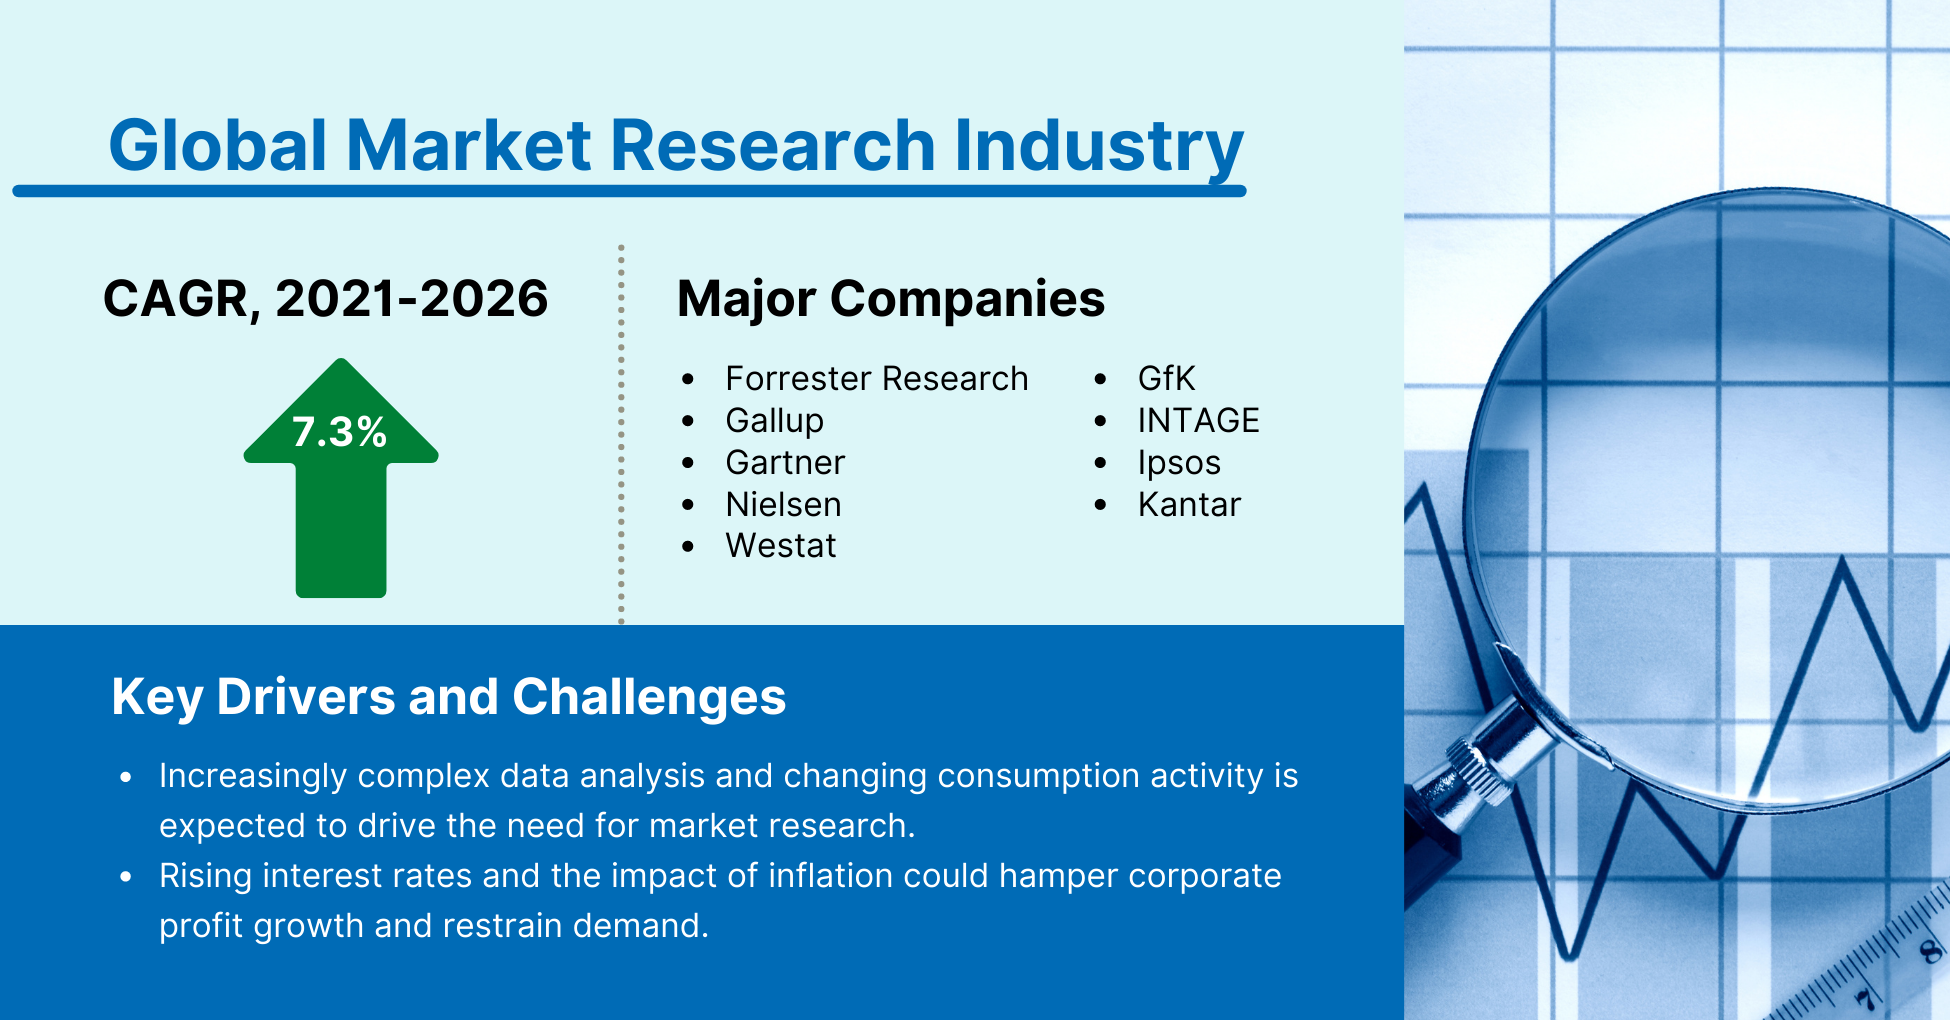 Global Market Research Industry Statistics Infographic